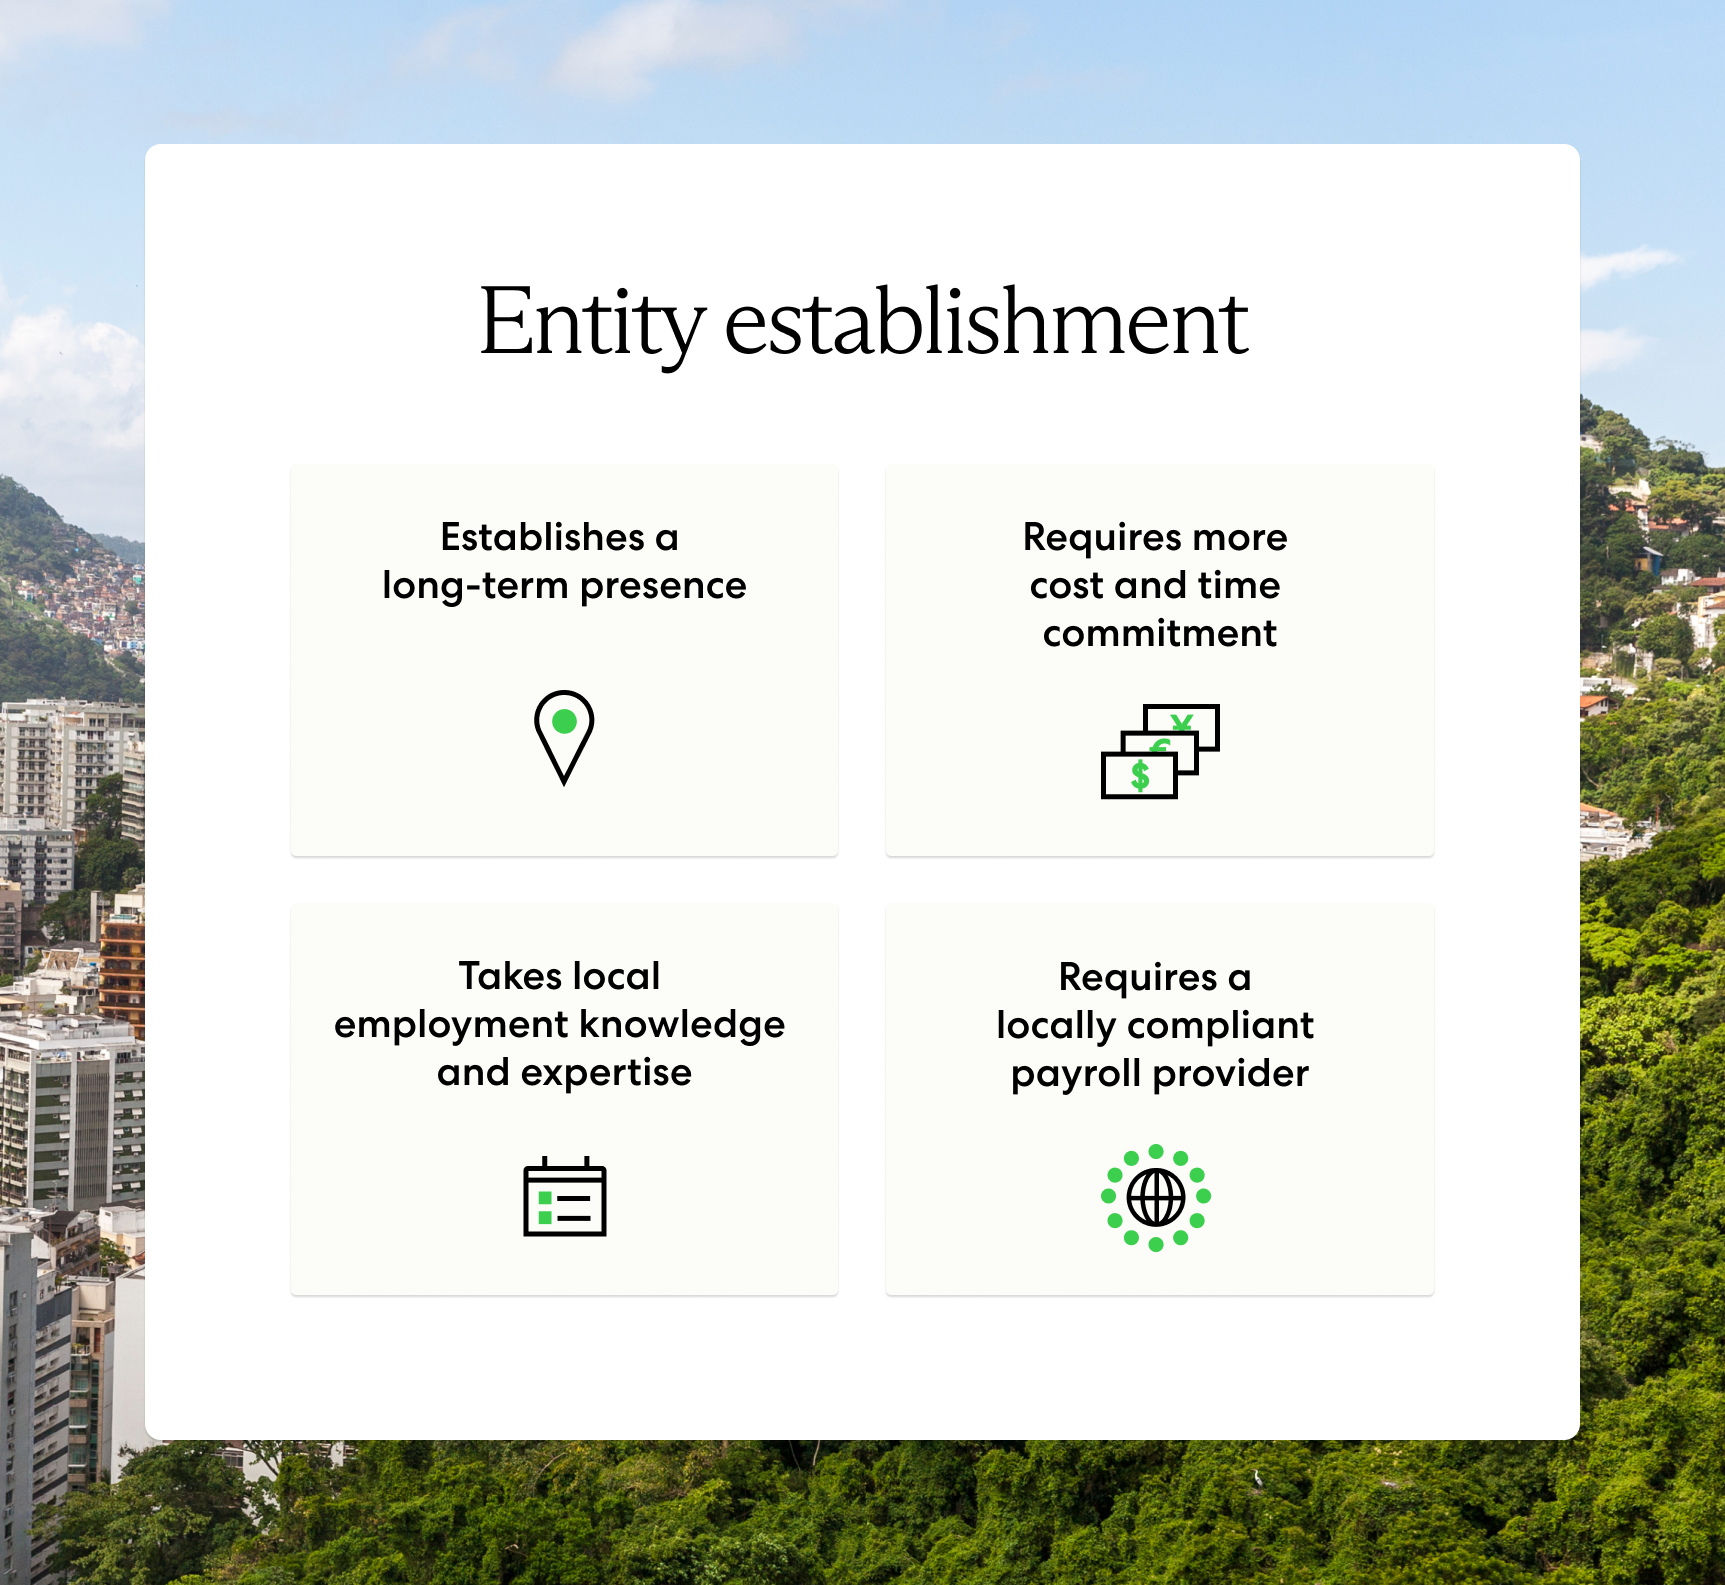 Entity establishment requires more cost and time commitment than an EOR. It takes local knowledge and expertise, and a locally compliant payroll provider